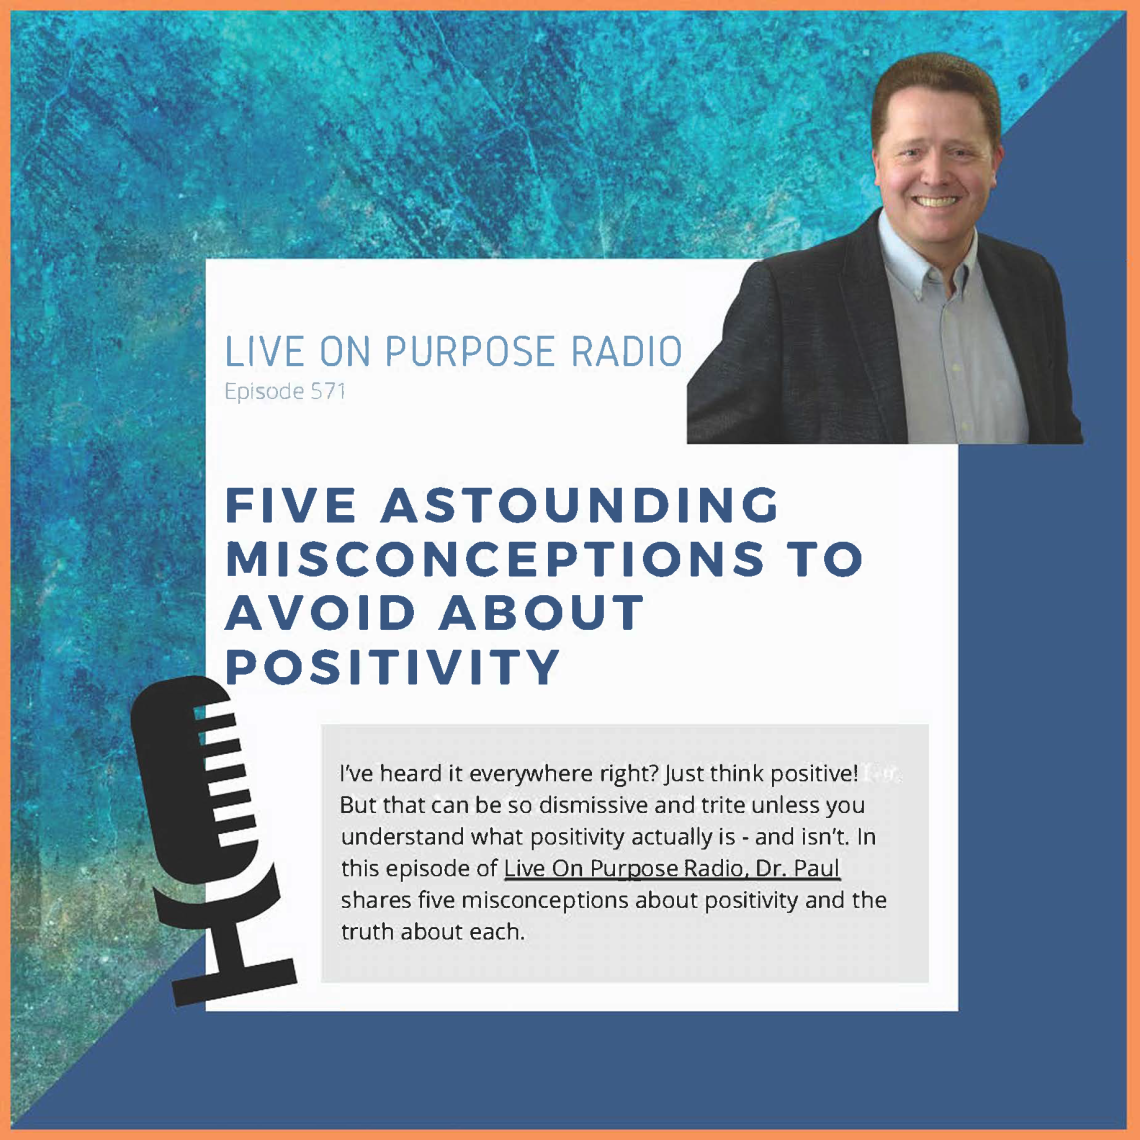 LIVE ON PURPOSE RADIO Episode 571 FIVE ASTOUNDING MISCONCEPTIONS TO AVOID ABOUT POSITIVITY I've heard it everywhere right? Just think positive! But that can be so dismissive and trite unless you understand what positivity actually is - and isn't. In this episode of Live On Purpose Radio, Dr. Paul shares five misconceptions about positivity and the truth about each.